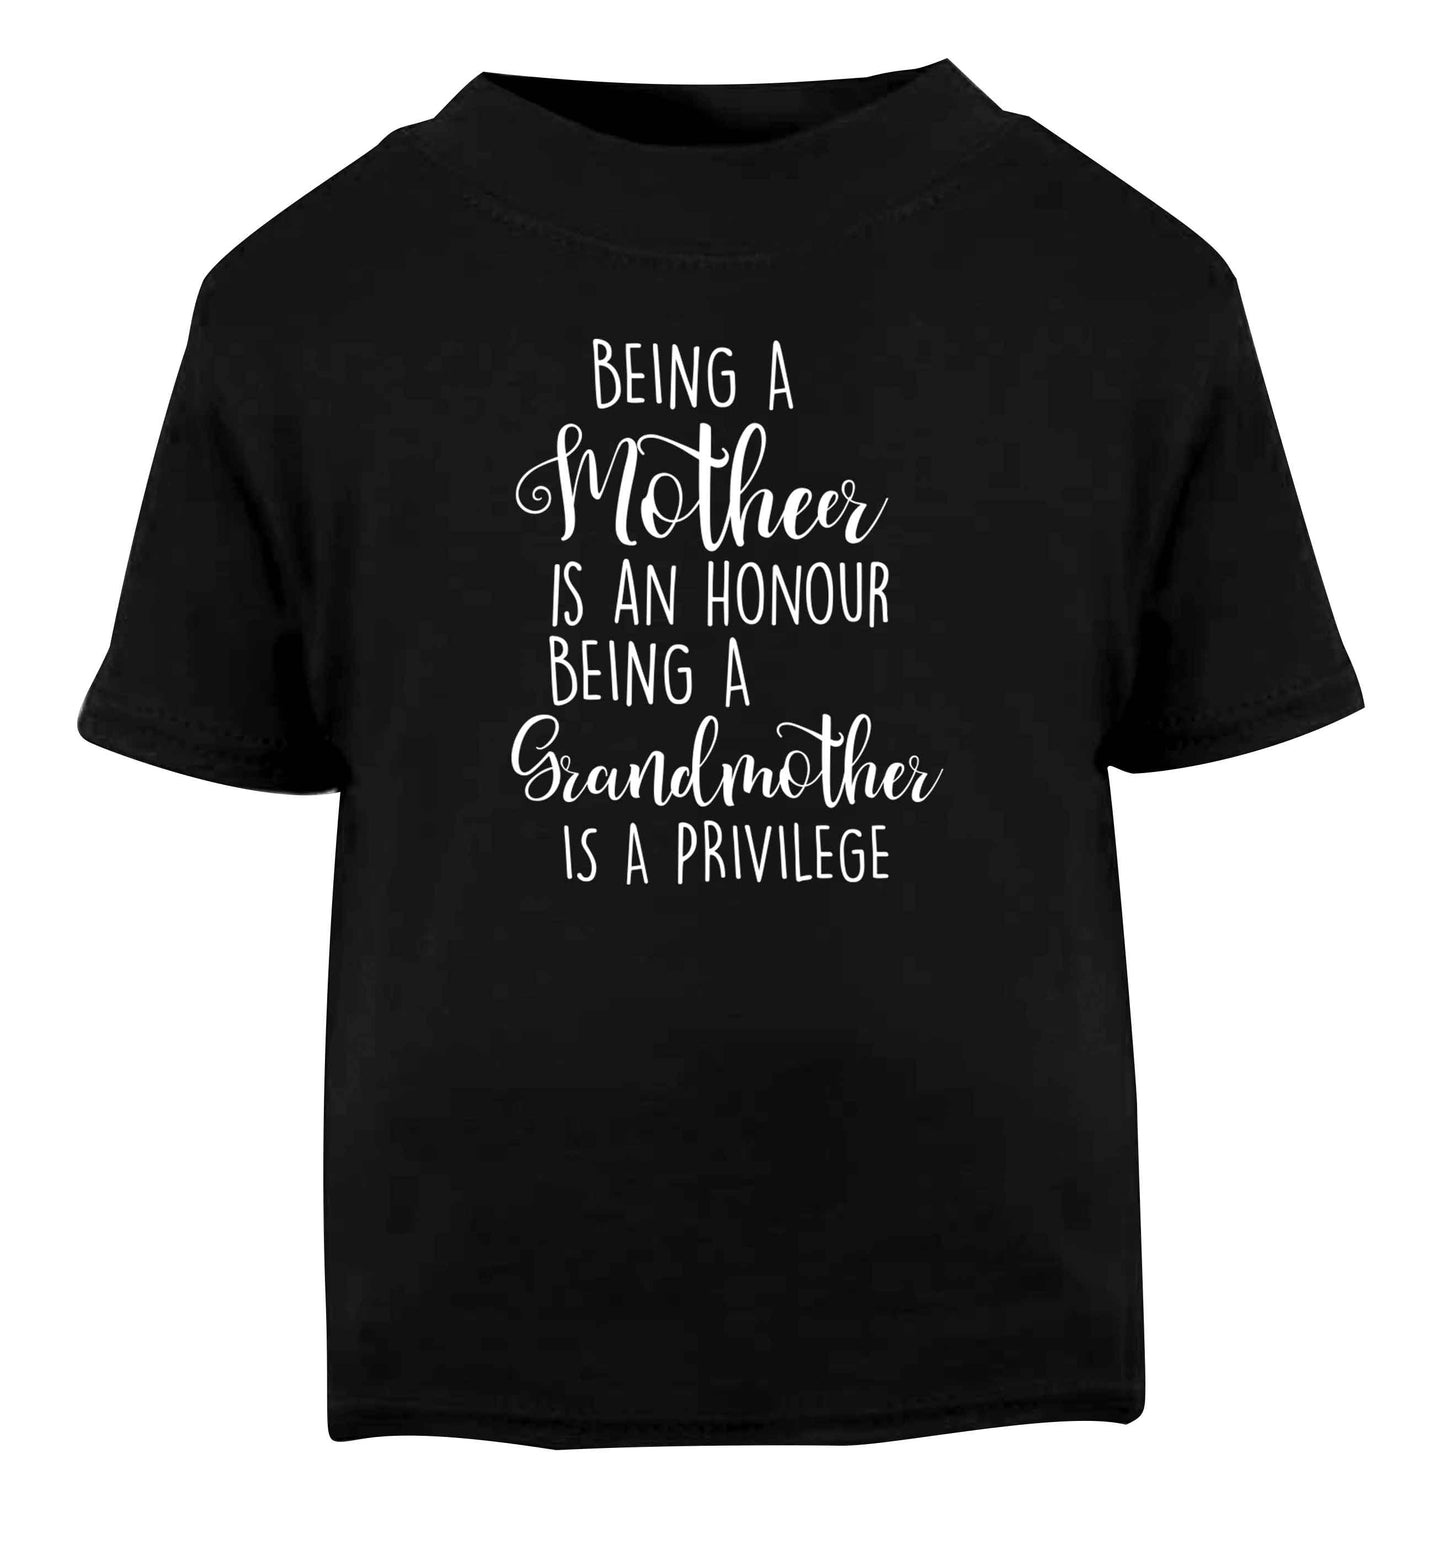 Being a mother is an honour being an grandmother is a privilege Black Baby Toddler Tshirt 2 years